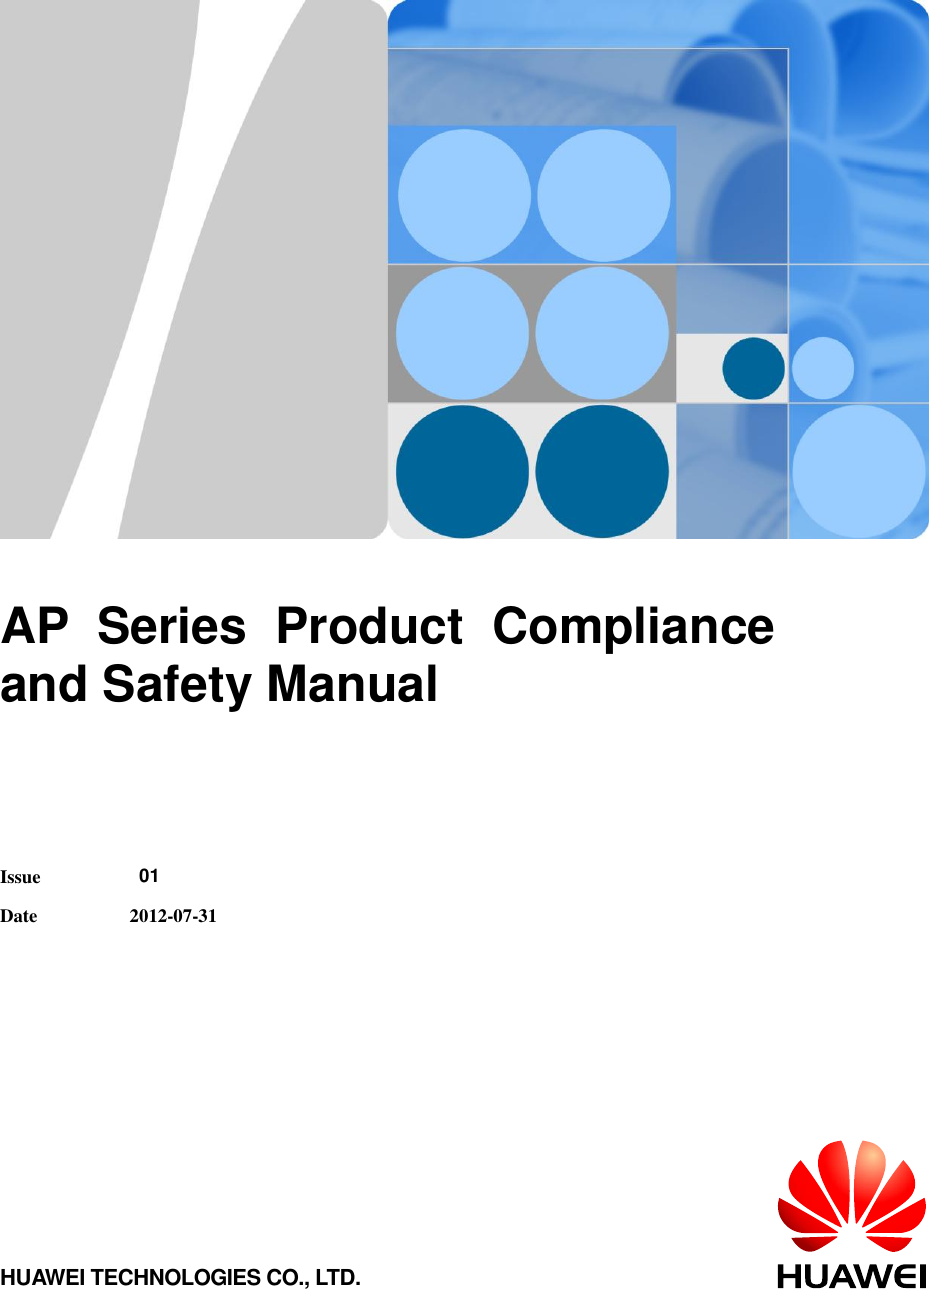         AP  Series  Product  Compliance and Safety Manual   Issue  01 Date 2012-07-31 HUAWEI TECHNOLOGIES CO., LTD. 